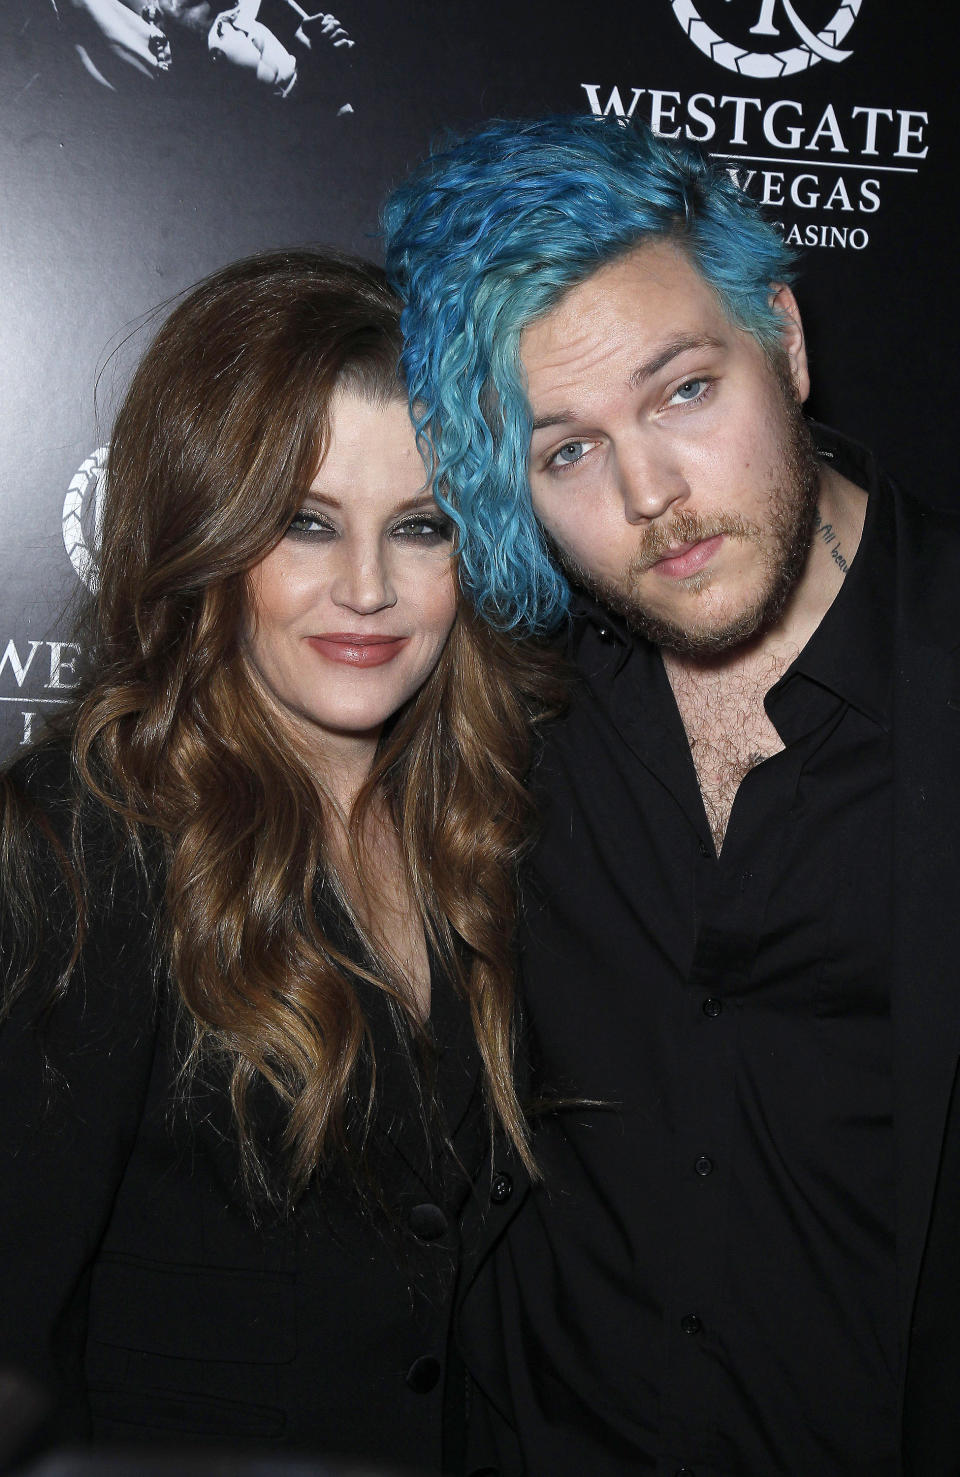 12 July 2020 - Benjamin Keough, Son of Lisa Marie Presley and Grandson of Elvis Presley, Dead at 27 From Apparent Suicide. File photo: 23 April 2015 - Las Vegas, Nevada - Lisa Marie Presley, Benjamin Keough. Red Carpet Premiere of "The Elvis Experience" Musical Production at The Westgate Las Vegas Resort and Casino. Photo Credit: MJT/AdMedia/MediaPunch /IPX